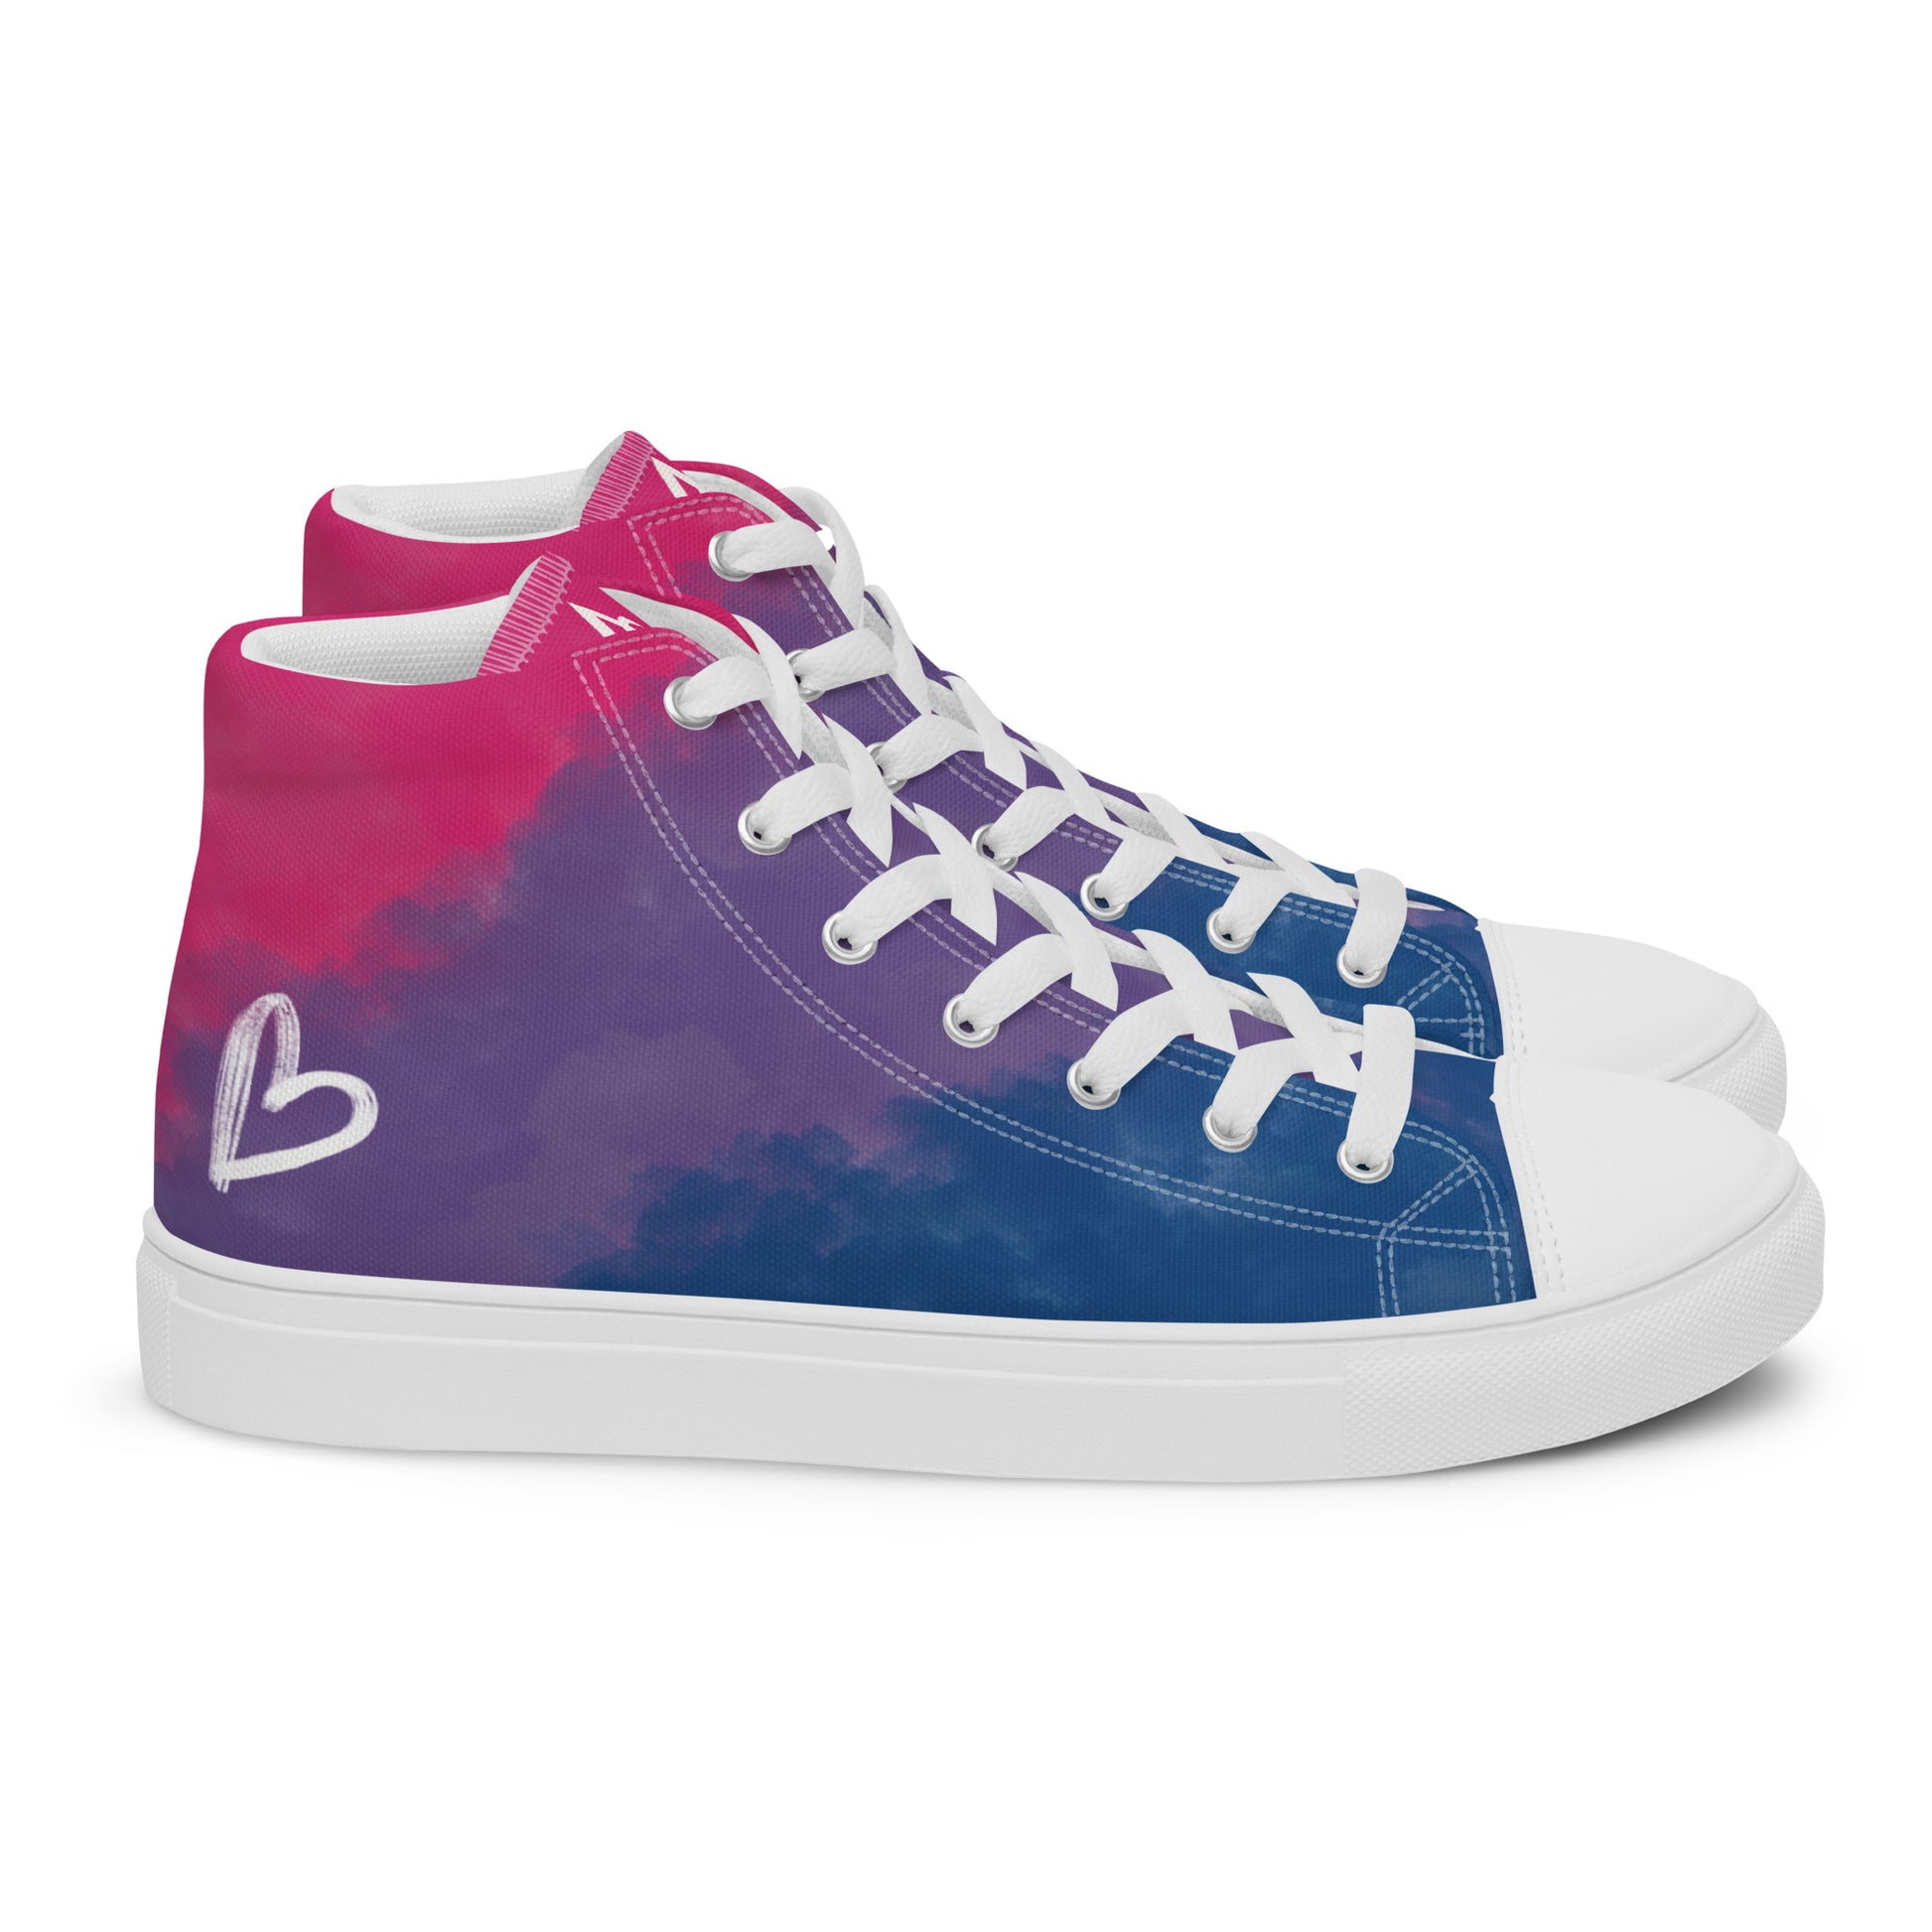 Right view: a pair of high top shoes with color block pink, purple, and blue clouds, a white hand drawn heart, and the Aras Sivad logo on the back.